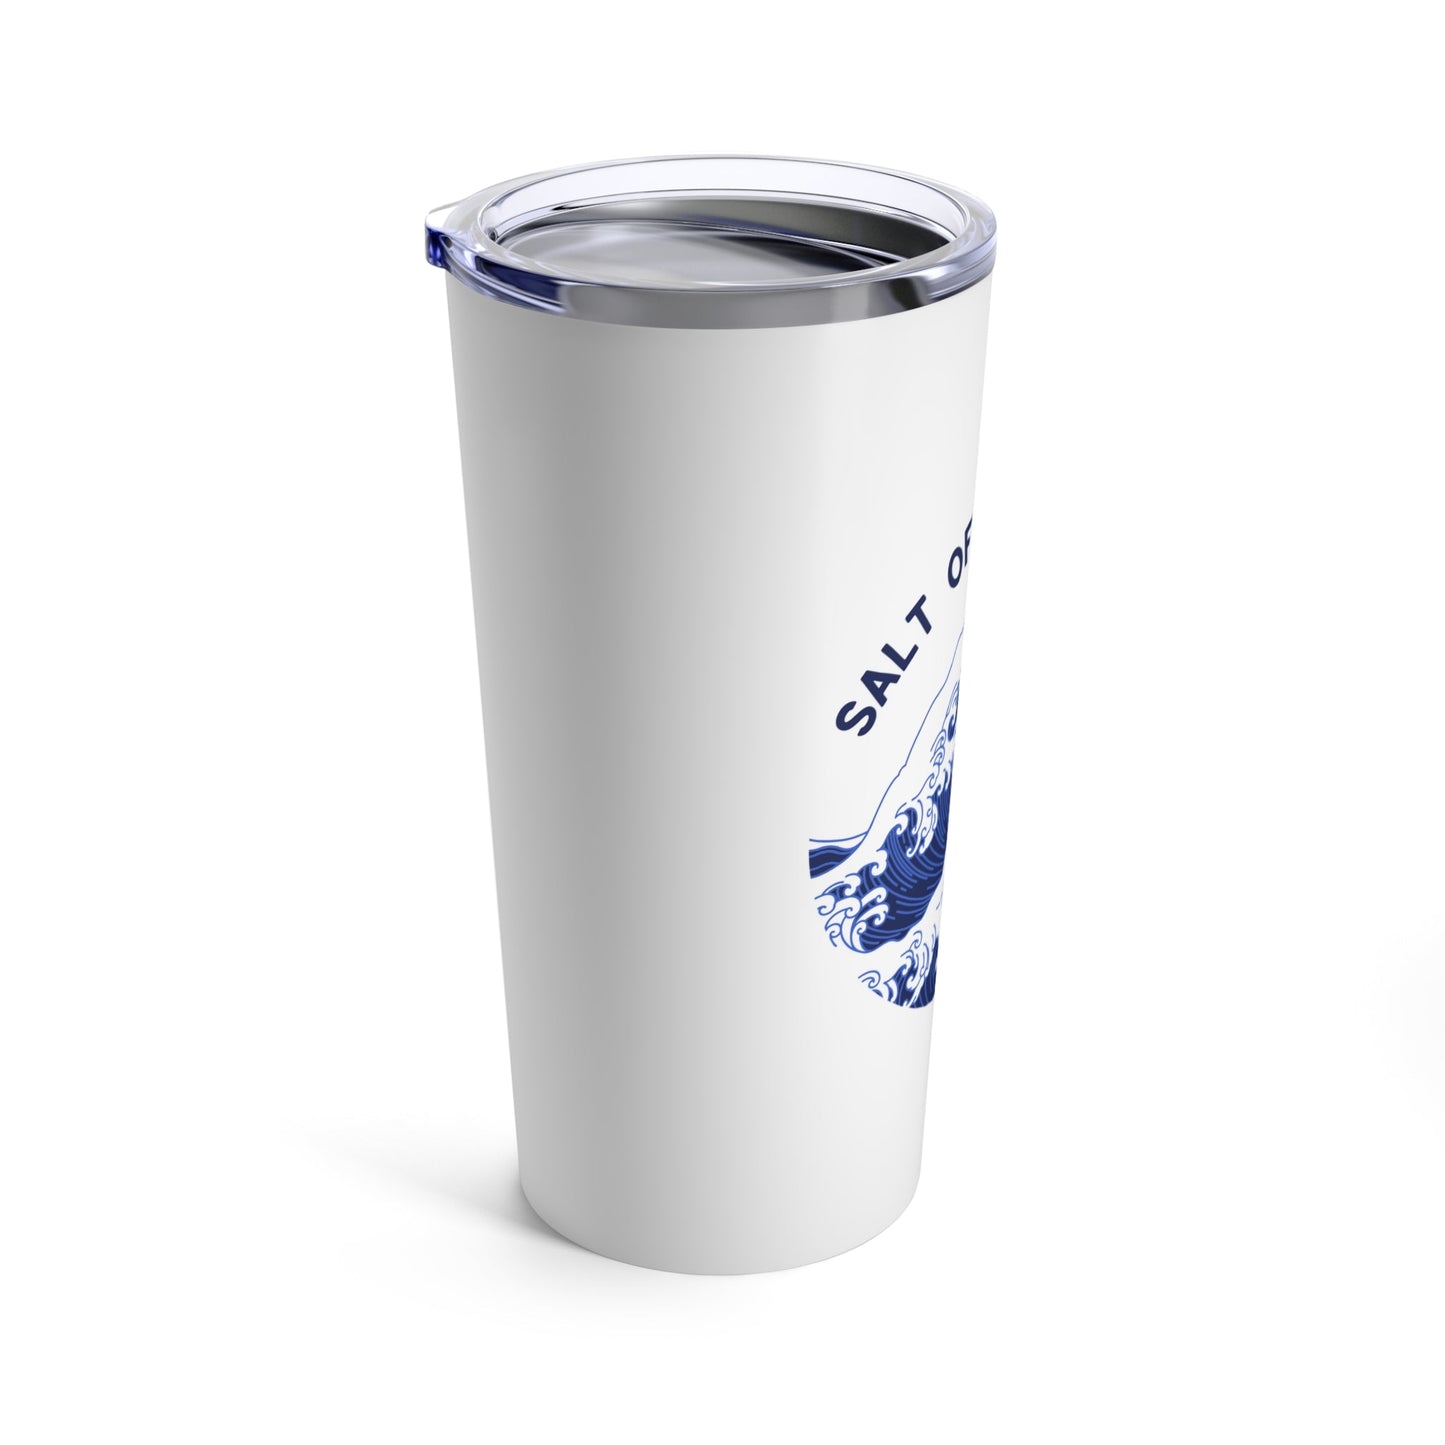 Tumbler 20oz by Salt of the Earth